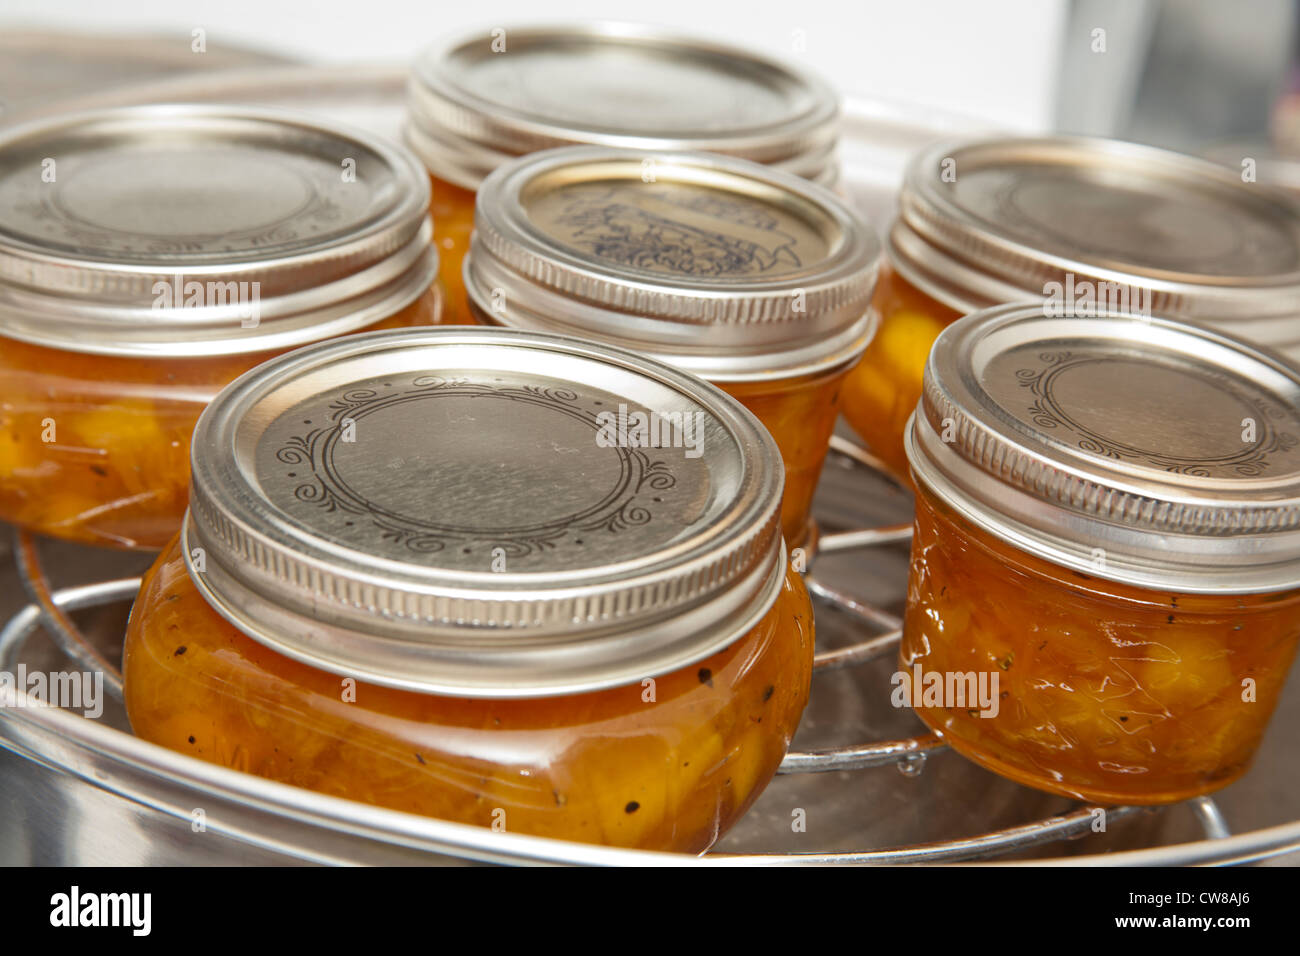 Jars of home canned preserves being processed Stock Photo